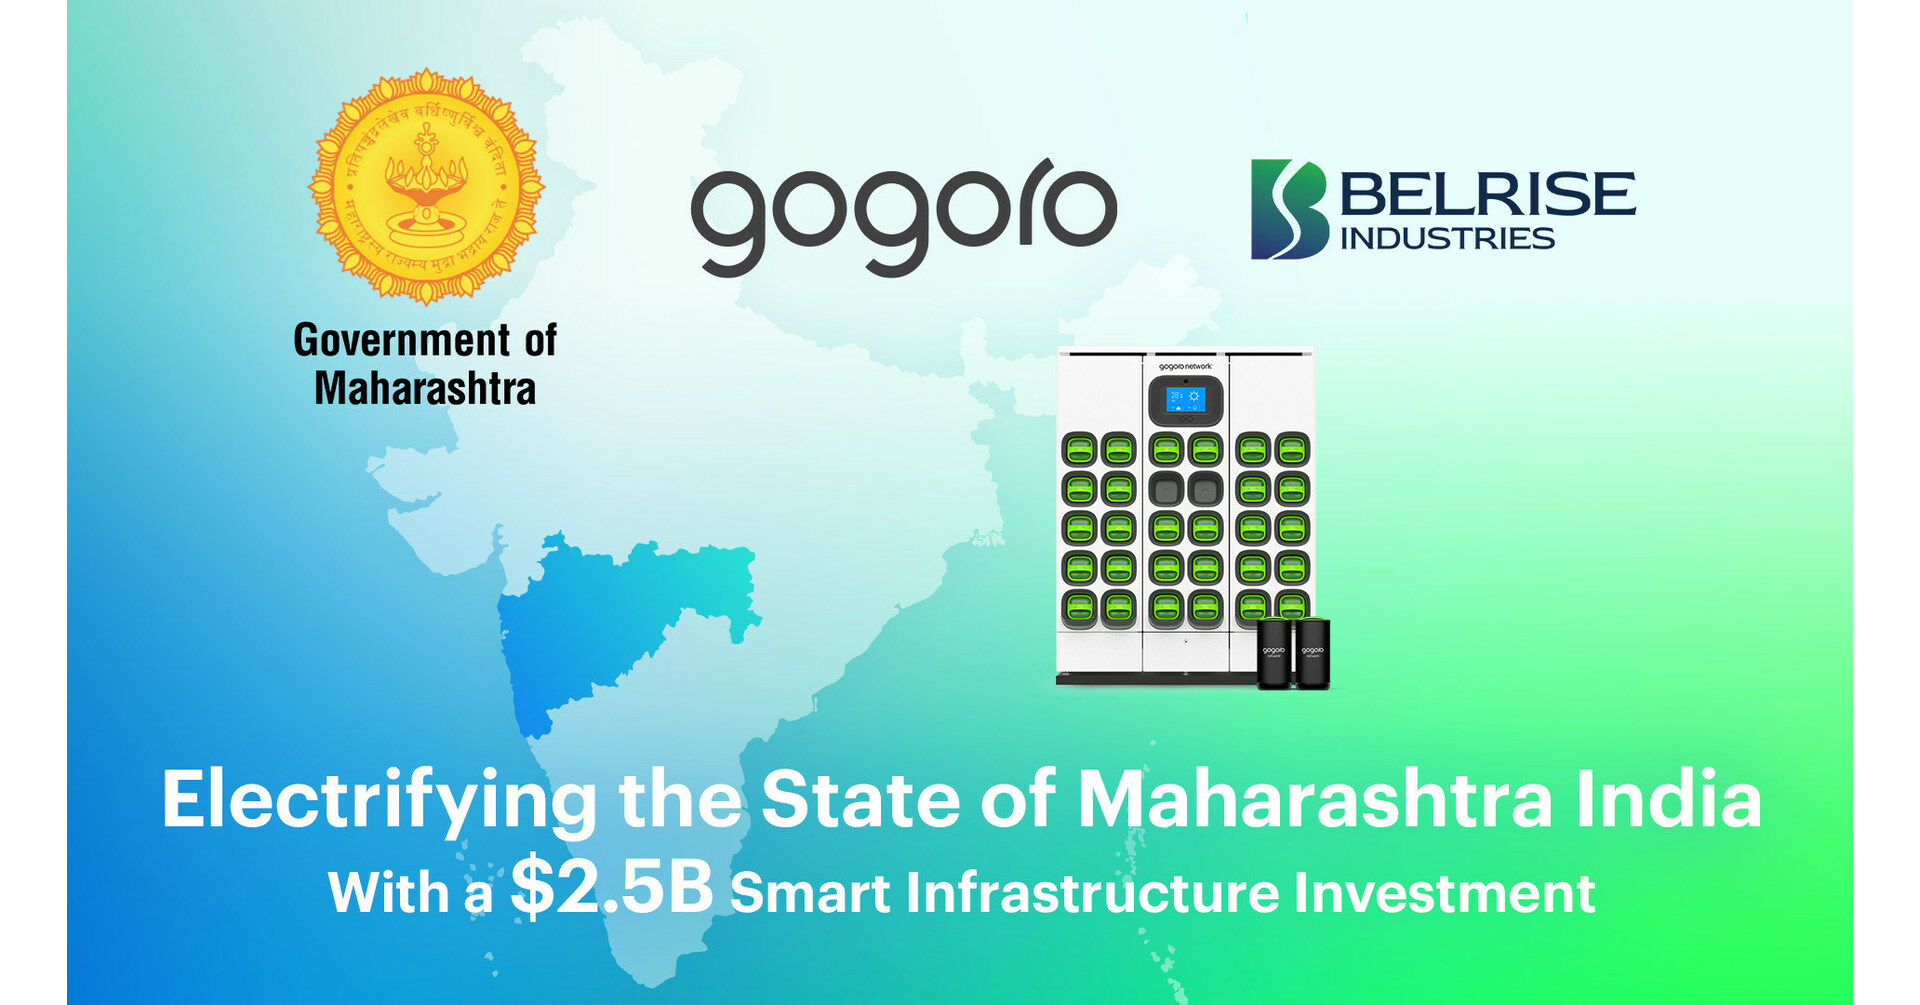 indias-state-of-maharashtra-announces-strategic-energy-partnership-with-gogoro-and-belrise-industries-to-build-2-5-billion-battery-swapping-infrastructure